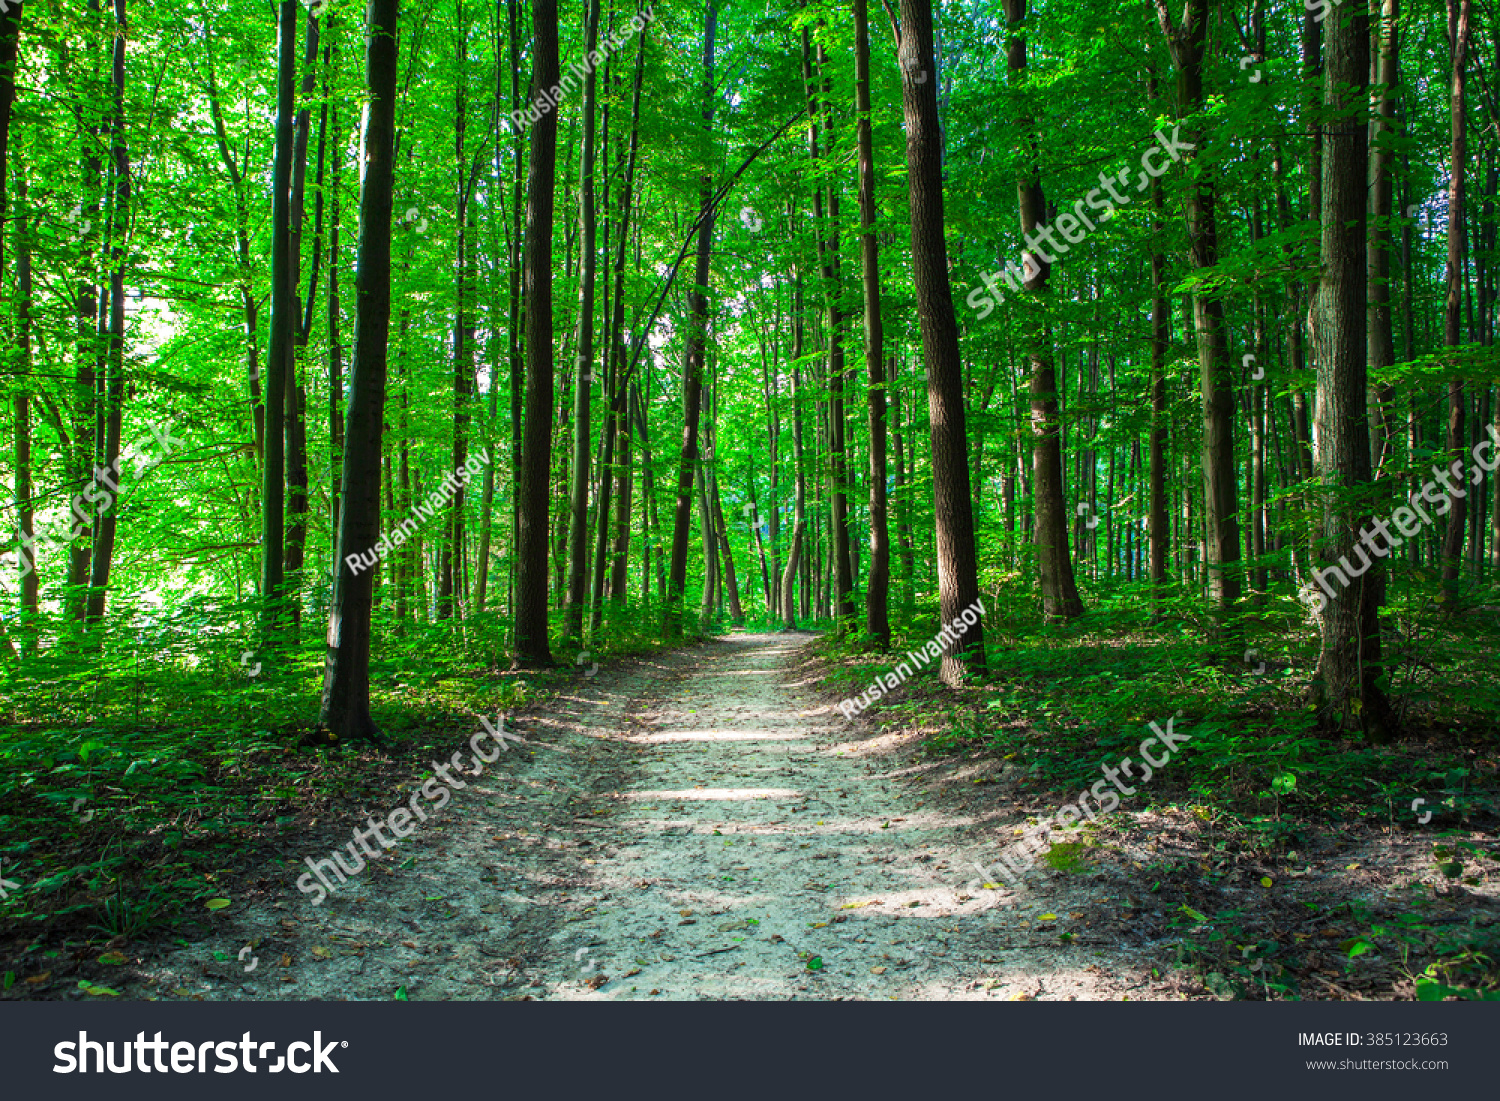 beautiful green forest #385123663